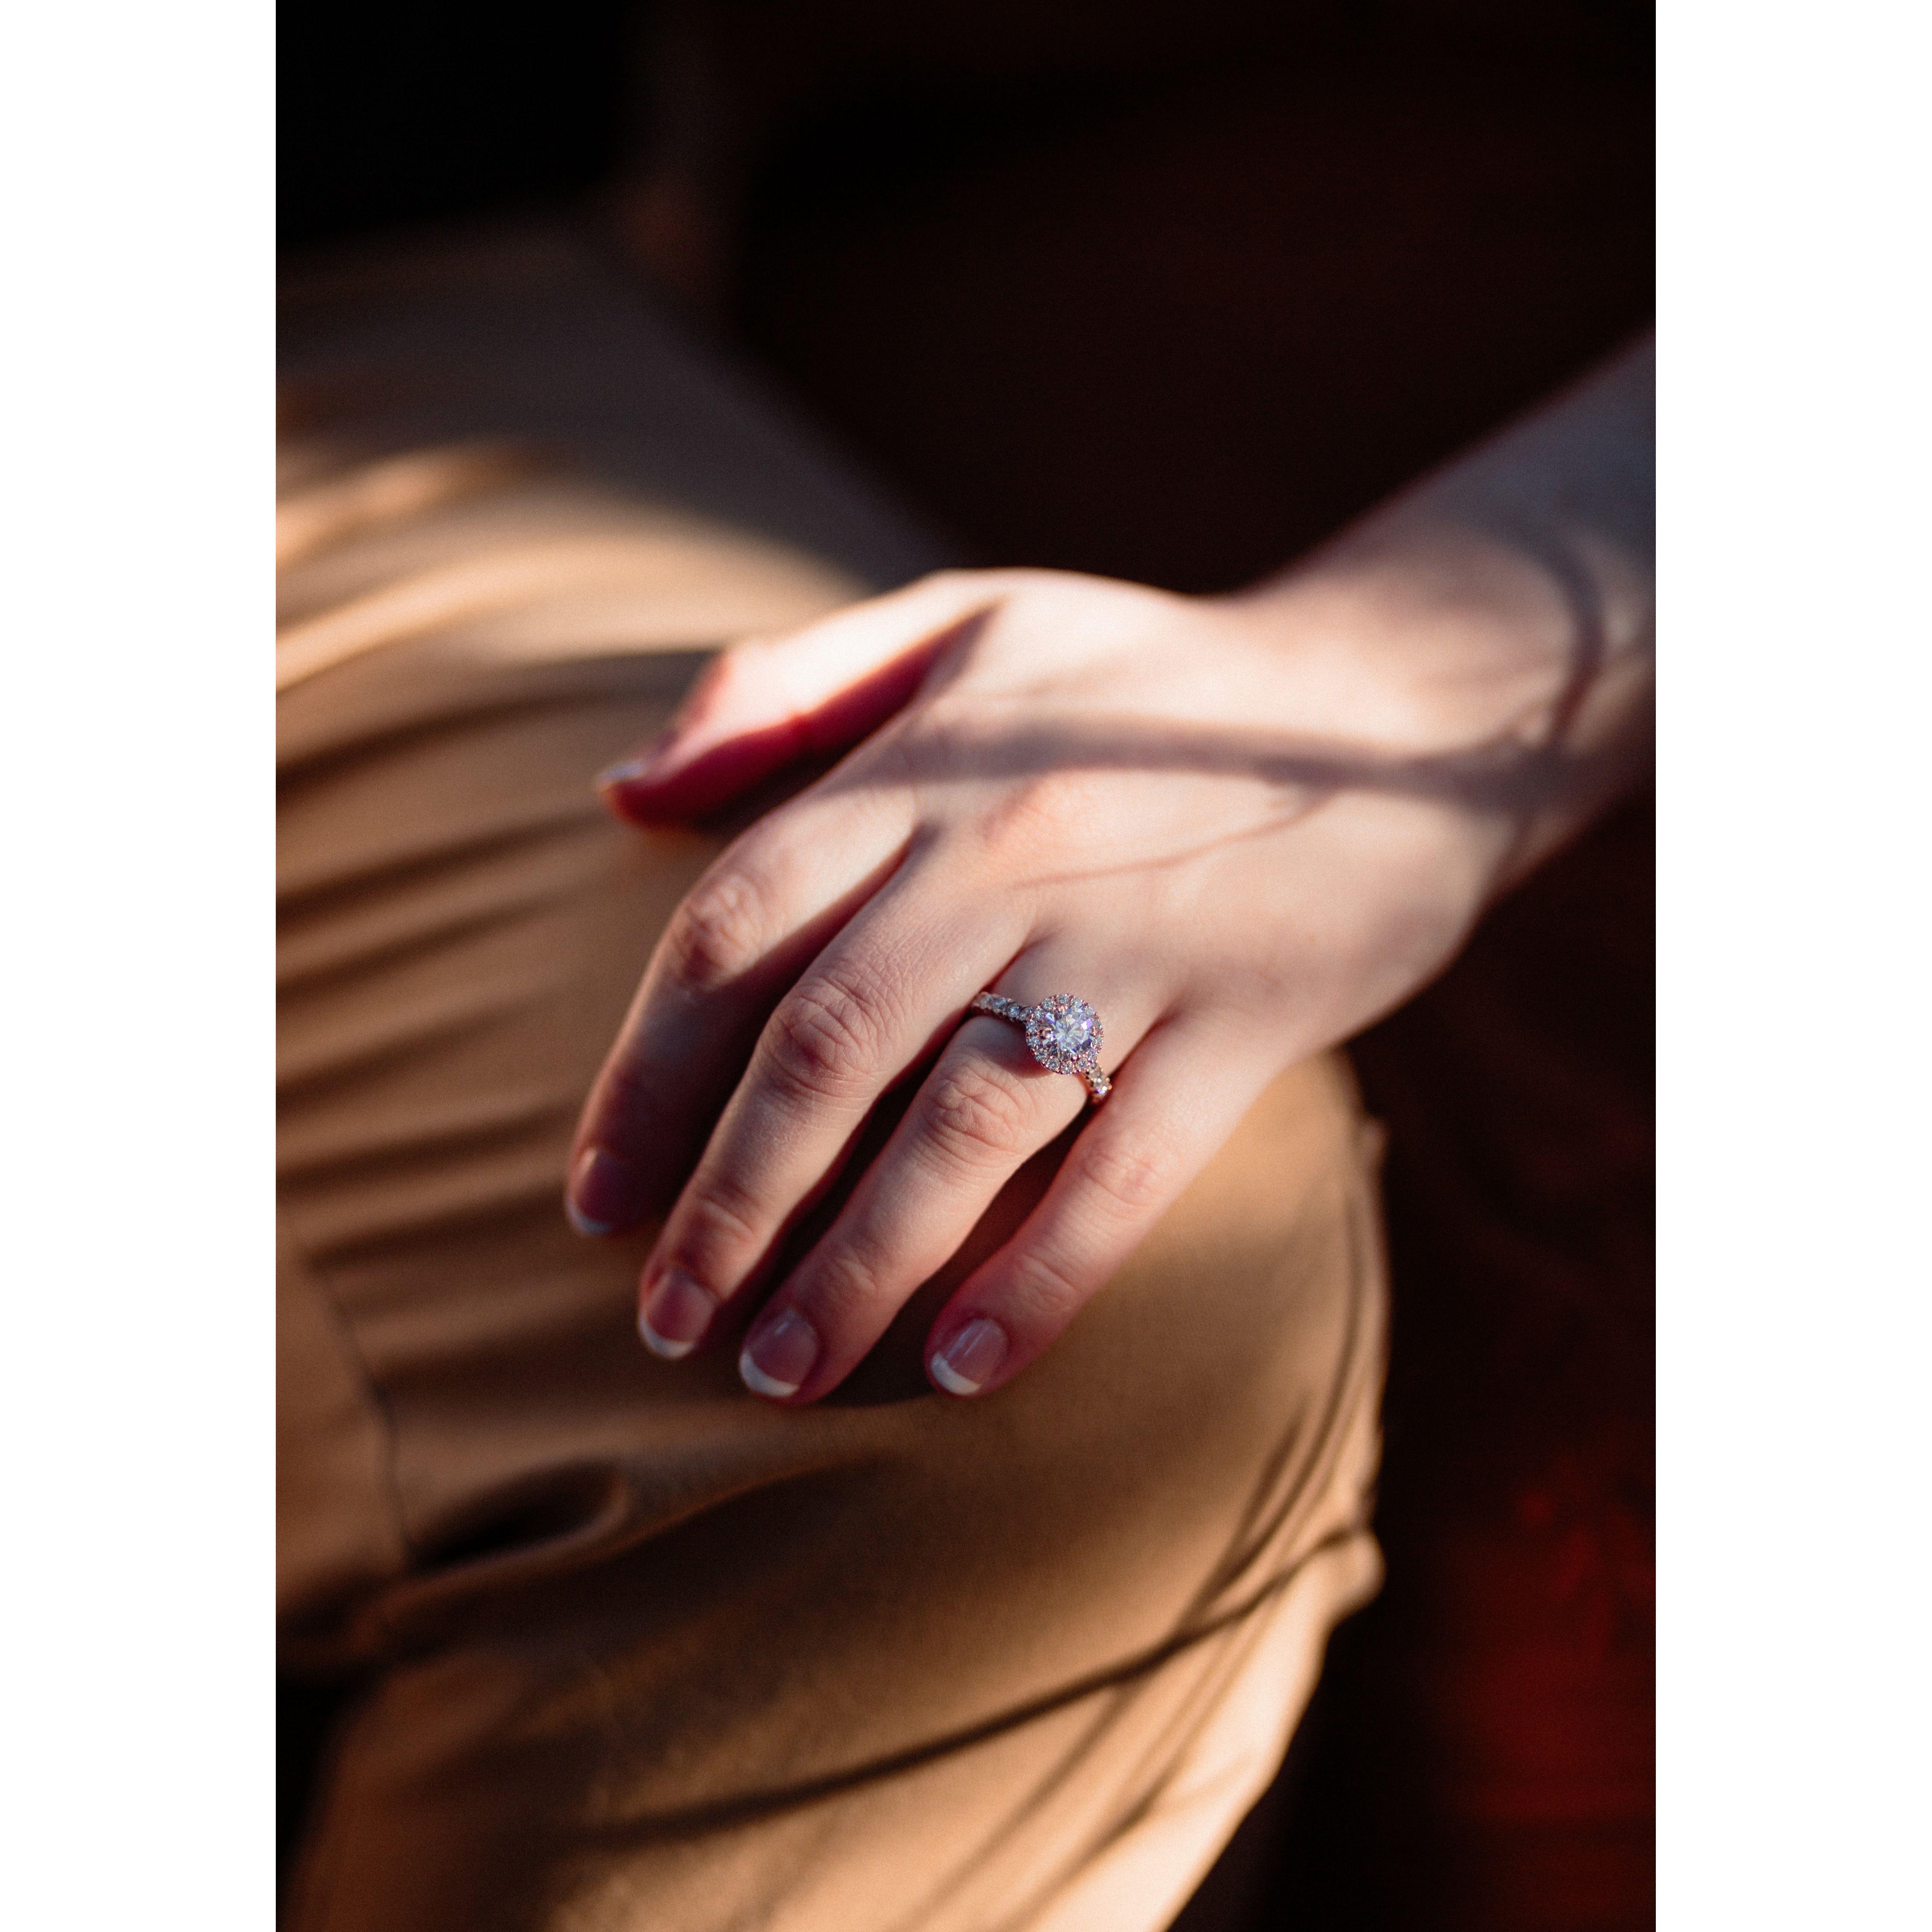 The beautiful ring I said yes to!

Taken by Simon Bonneau of Grand Jour Photography